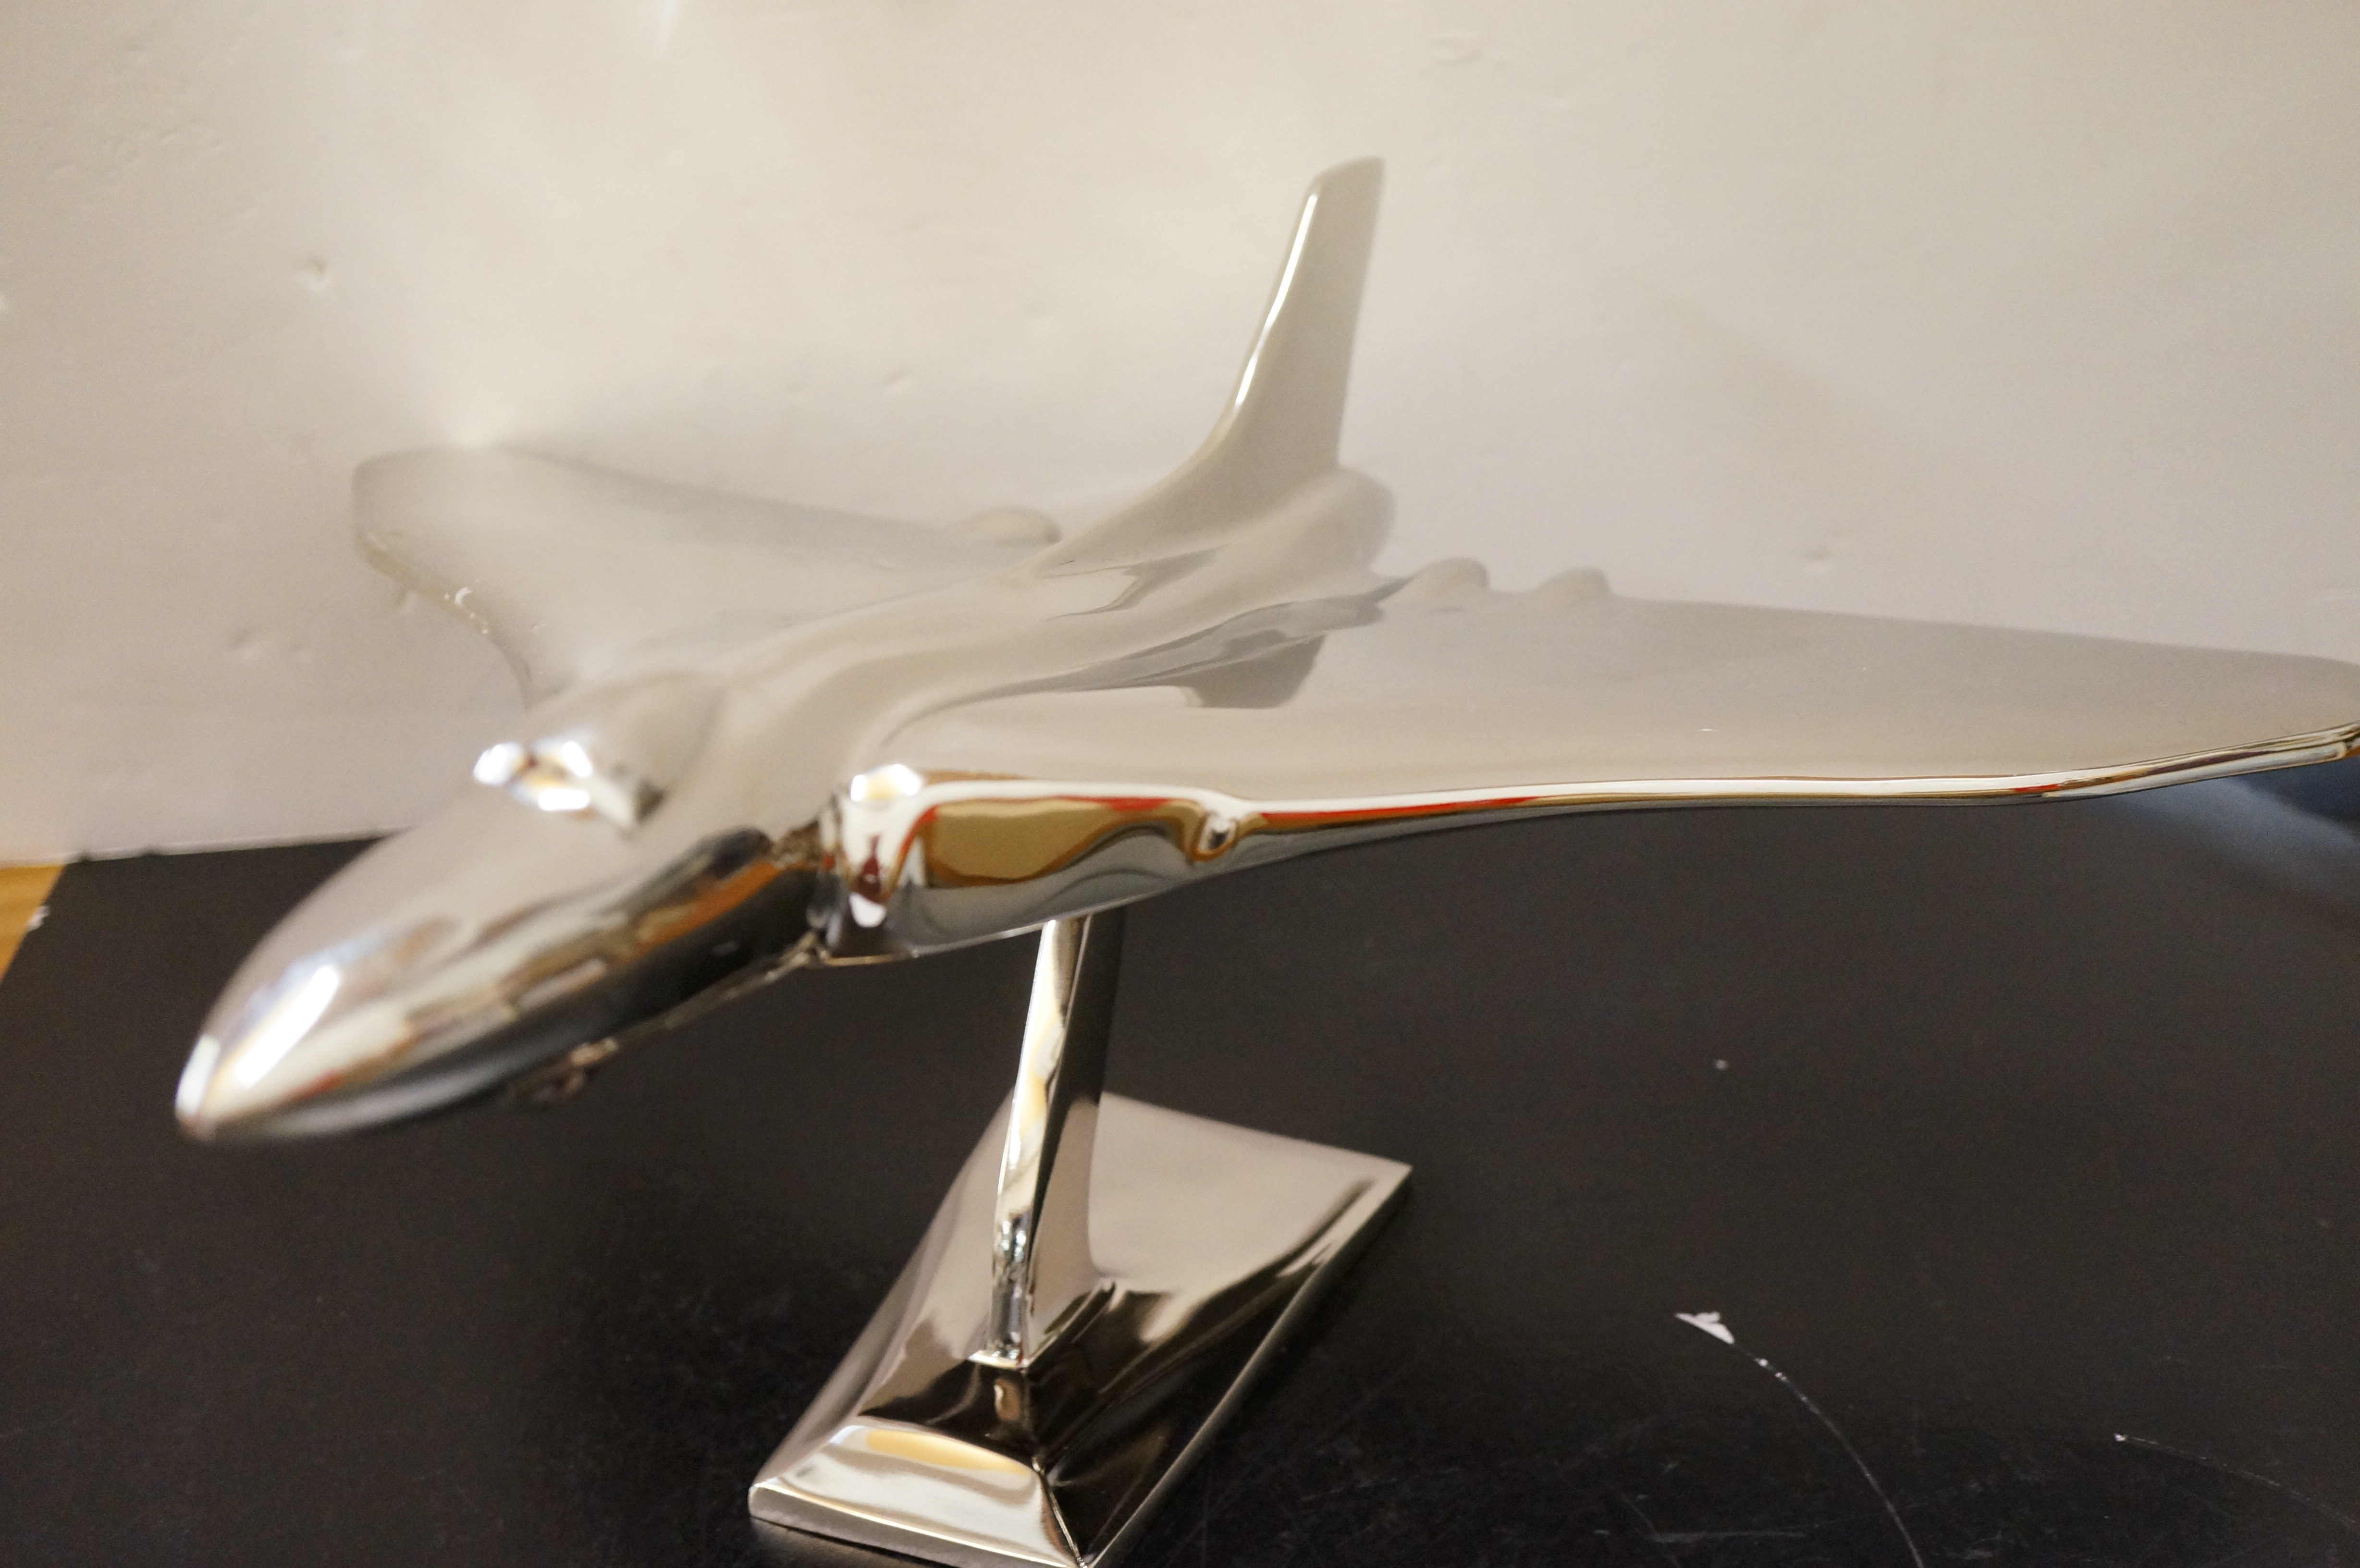 Large chrome vulcan bomber on stand